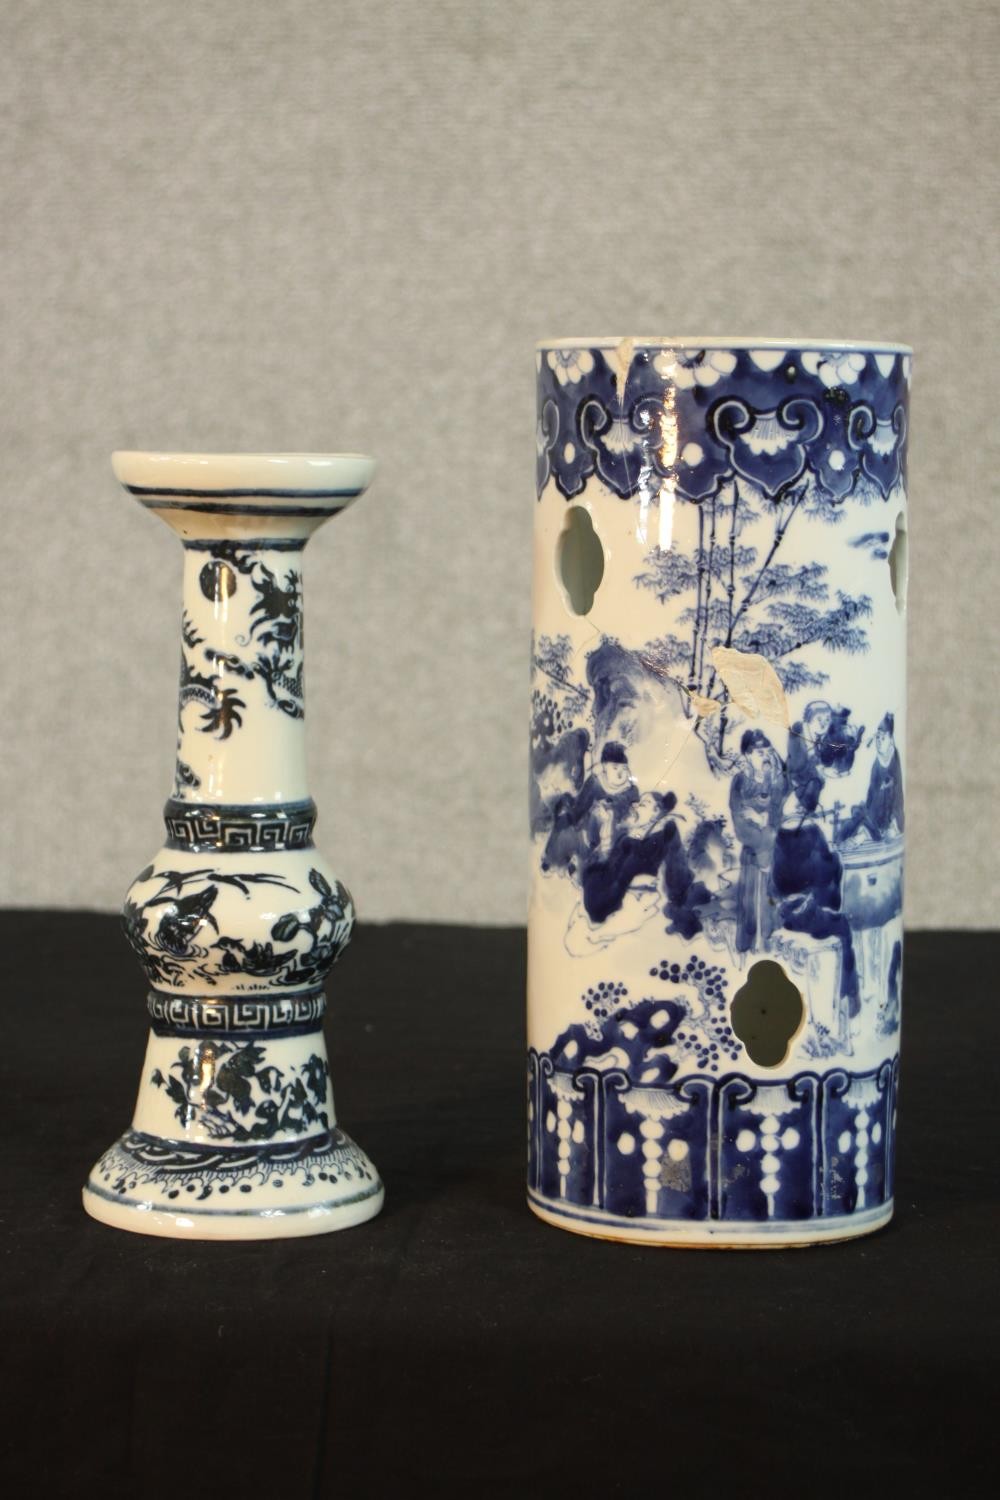 A Chinese blue and white porcelain candle holder painted with flying dragon and flaming pearl